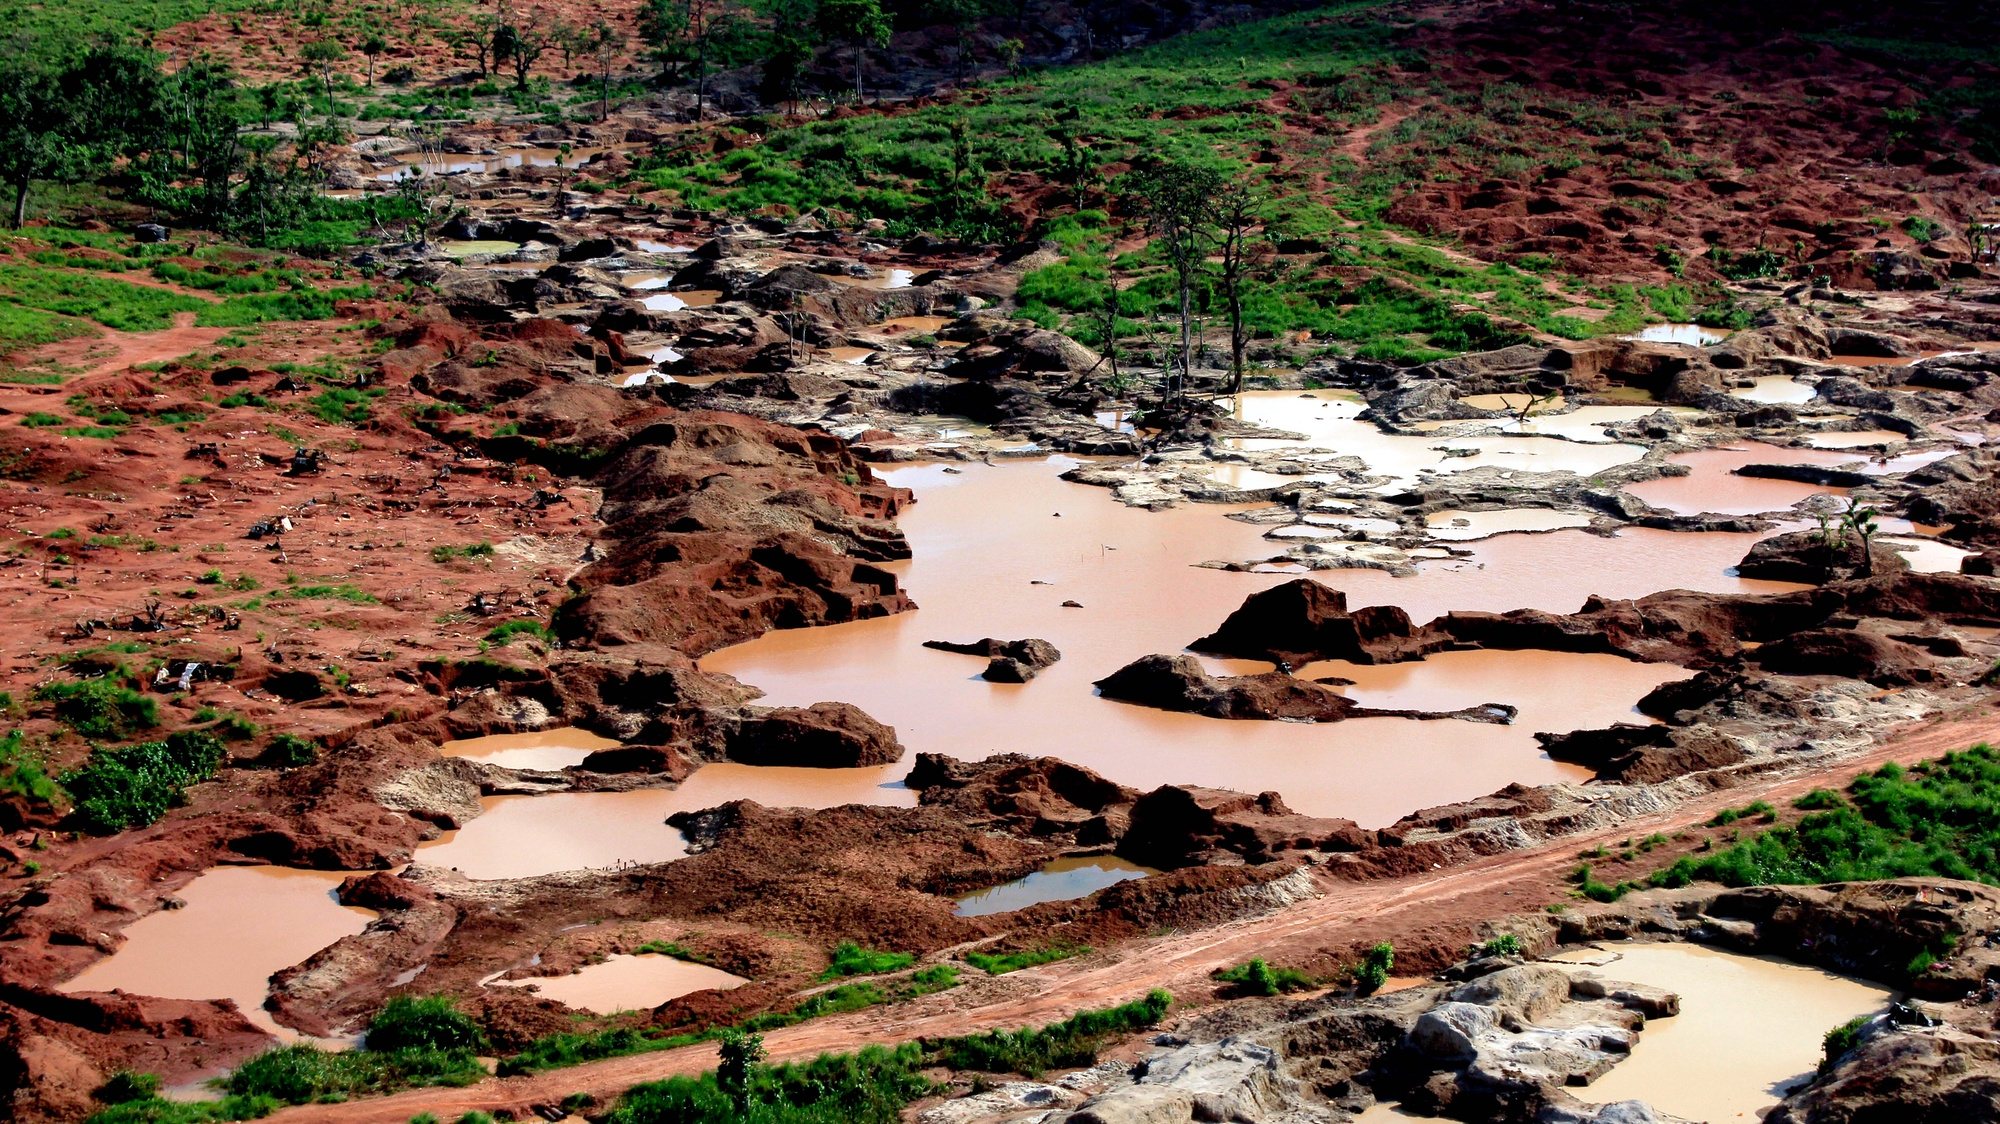 Aerial view of the diamond mines where Congolese migrants were working and began to leave the mining zone following Angola’s authorities ‘Operation Transparency’ in the province of Lunda Norte, Angola, 20 October 2018 (issued 21 October 2018). The operation, which takes place in the Angolan provinces of Lunda Norte, Lunda Sul, Moxico, Bié, Malanje, Cuando-Cubango, Uíje, and Zaire, aims to &quot;only restore legality regarding the sale of diamonds and normalize the movement of people and goods&quot;, assure the Angolan authorities. AMPE ROGERIO/LUSA